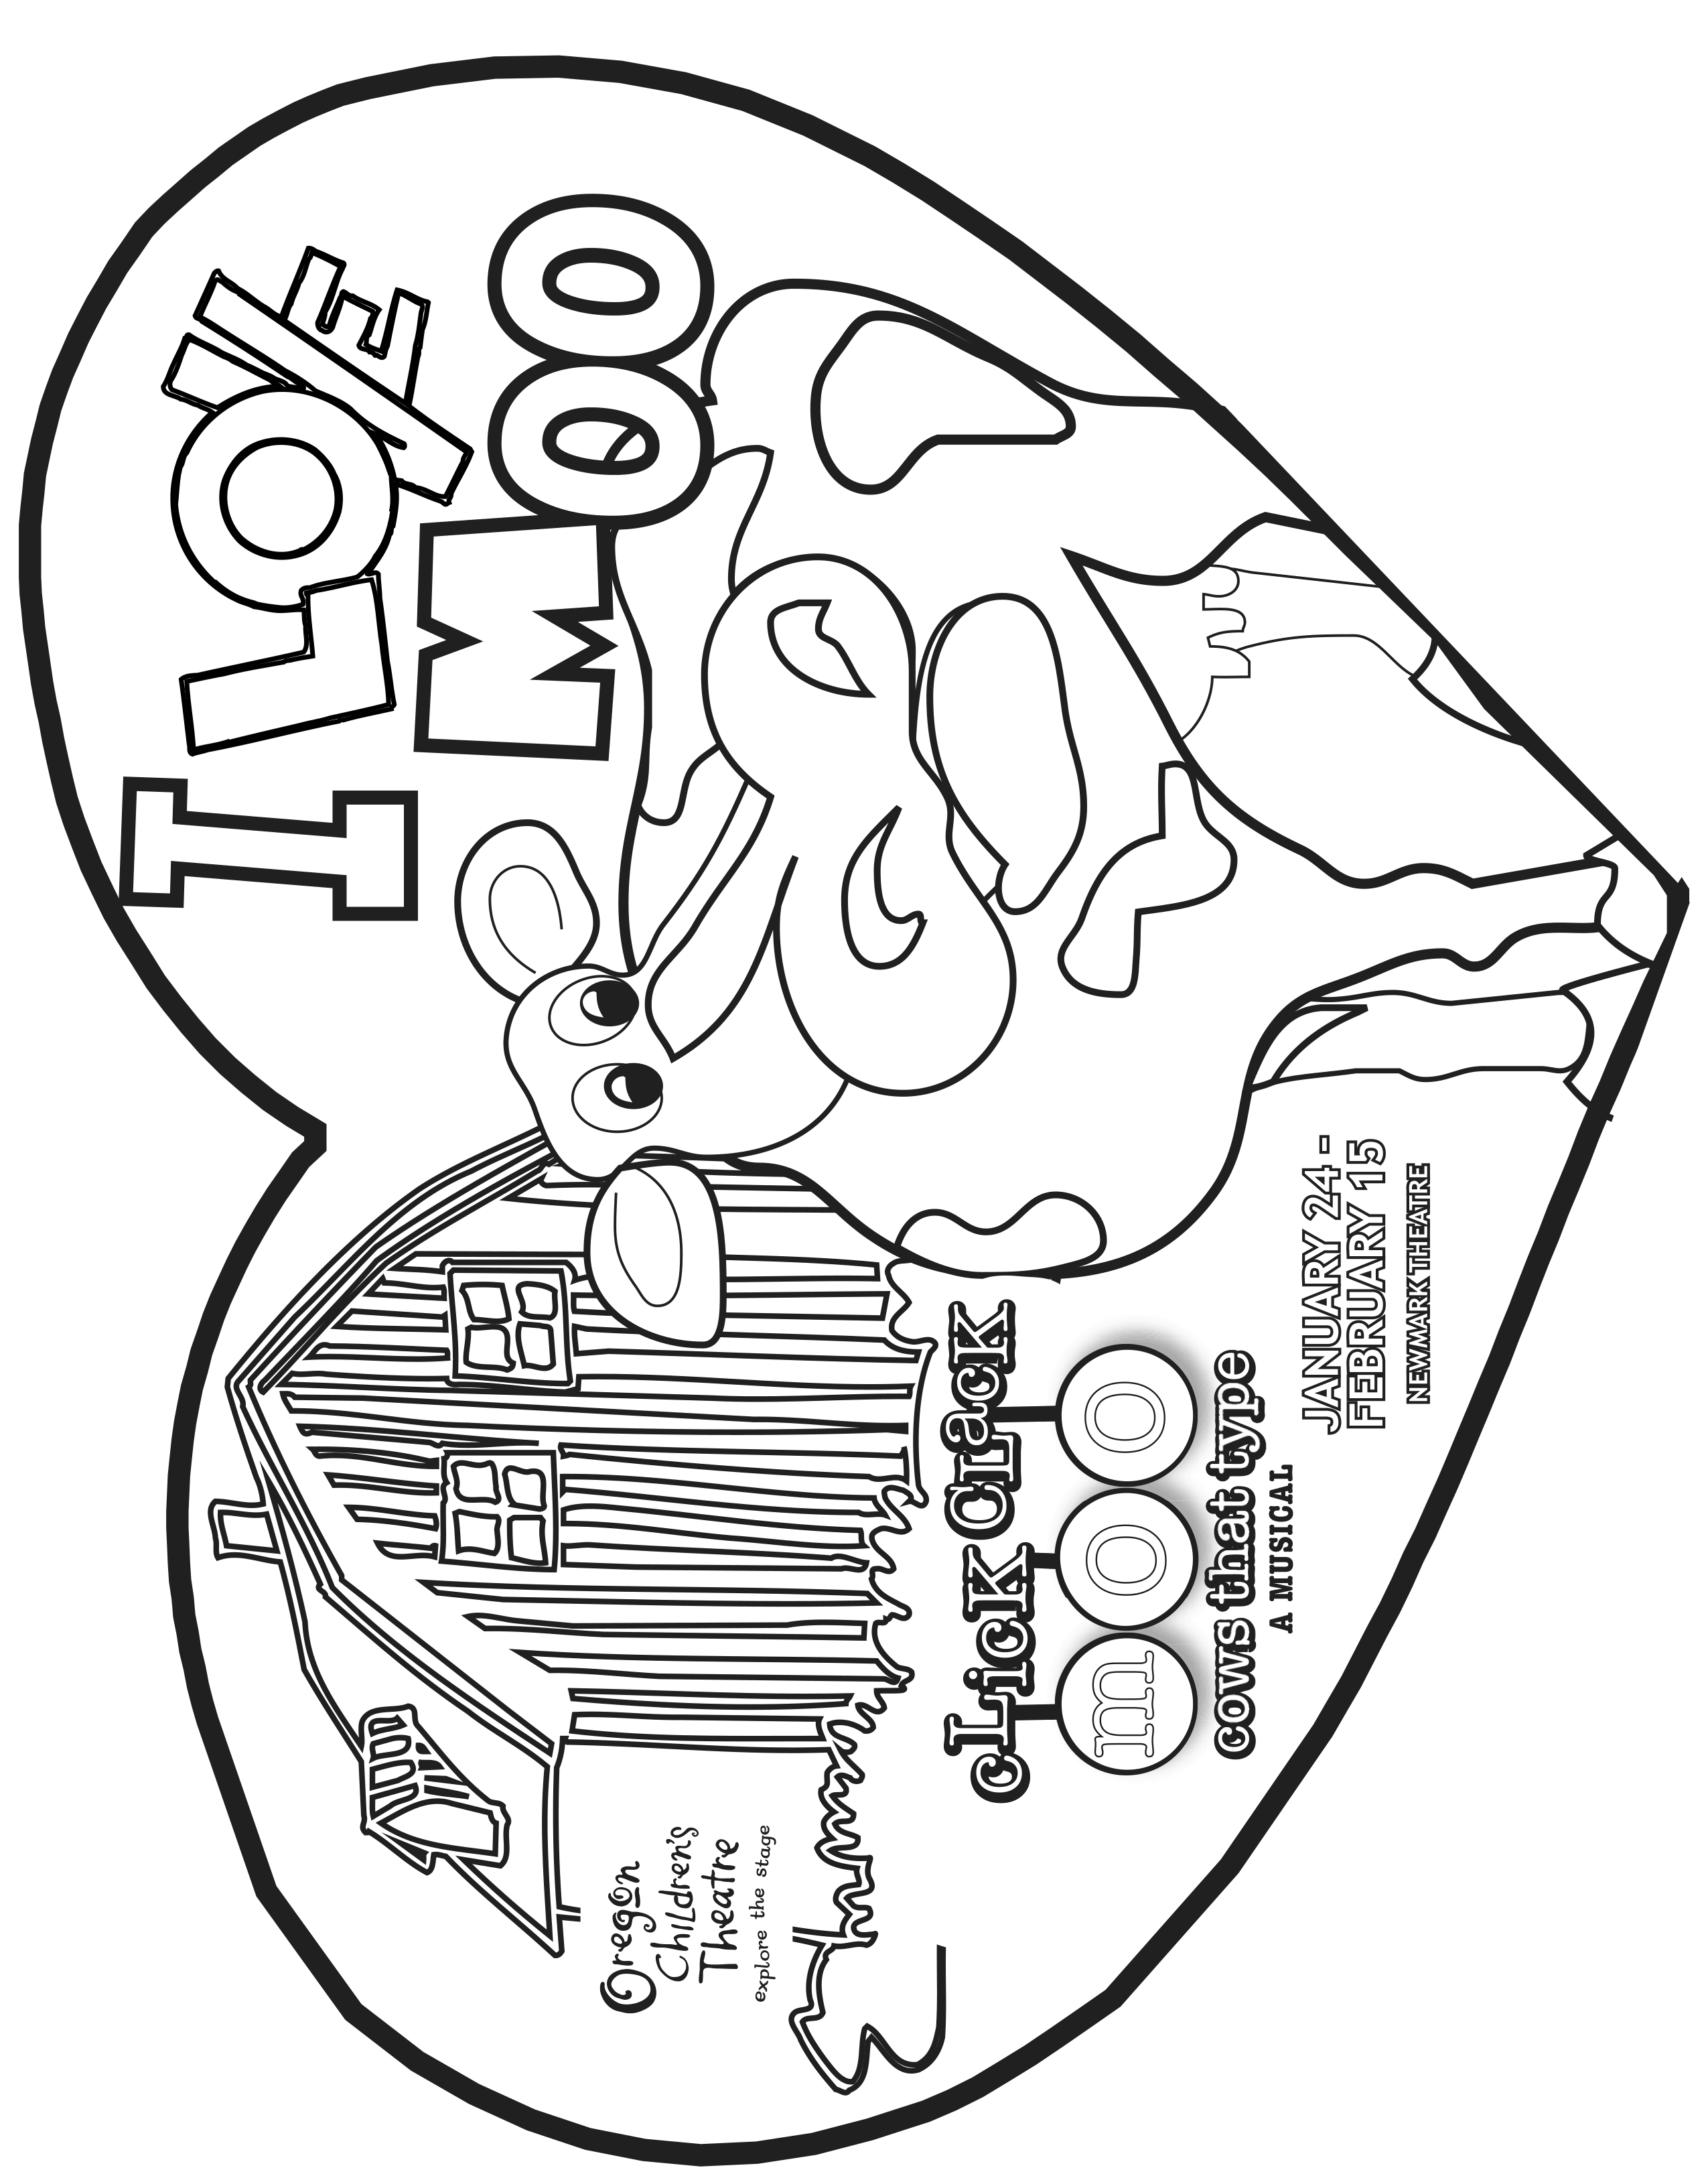 Free Click Clack Moo Cows That Type Coloring Pages, Download.